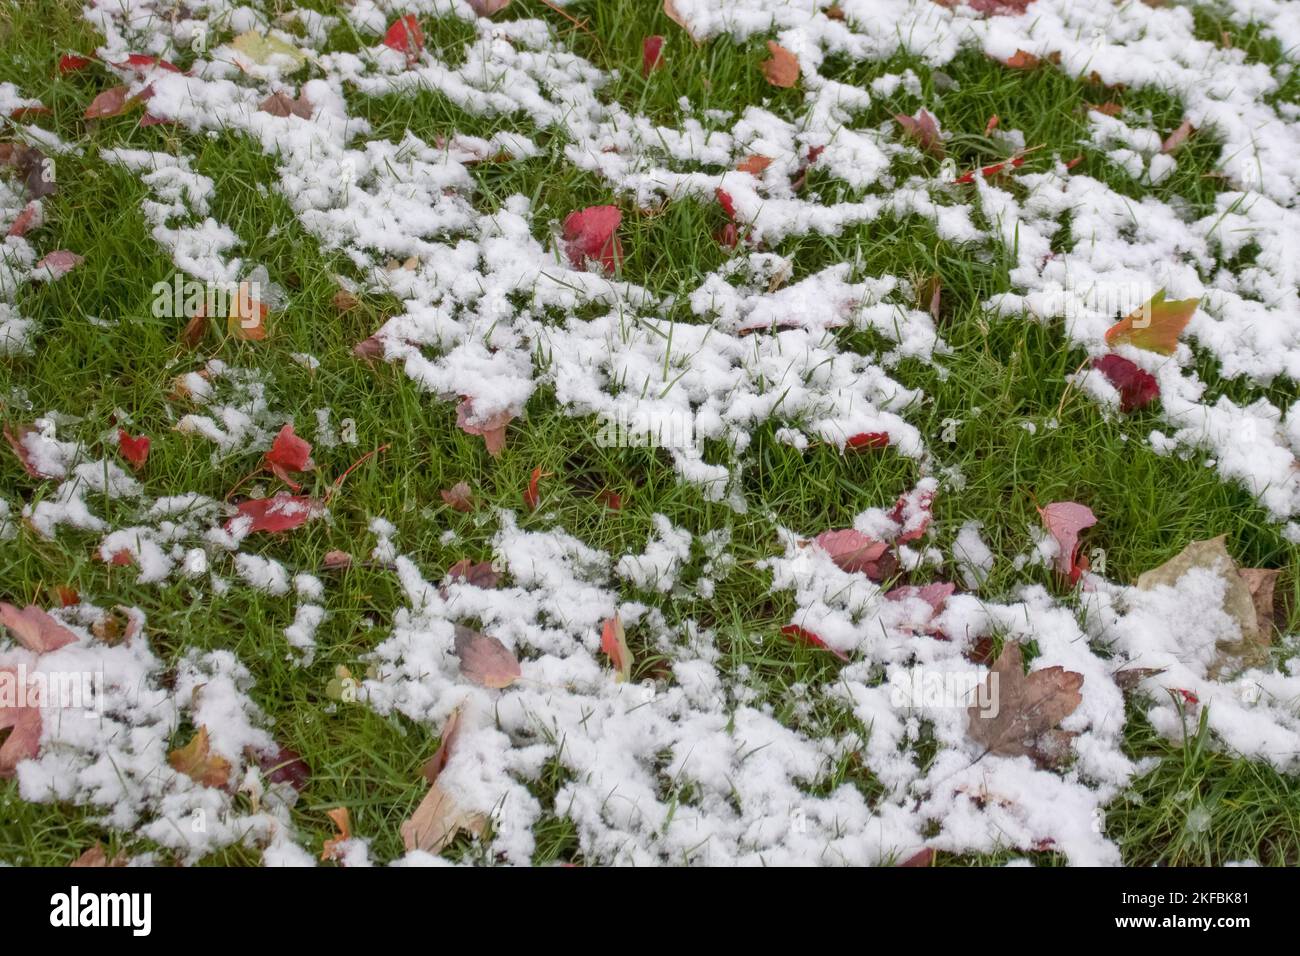 Melting snow on green grass and brightly colored autumn leaves - background Stock Photo